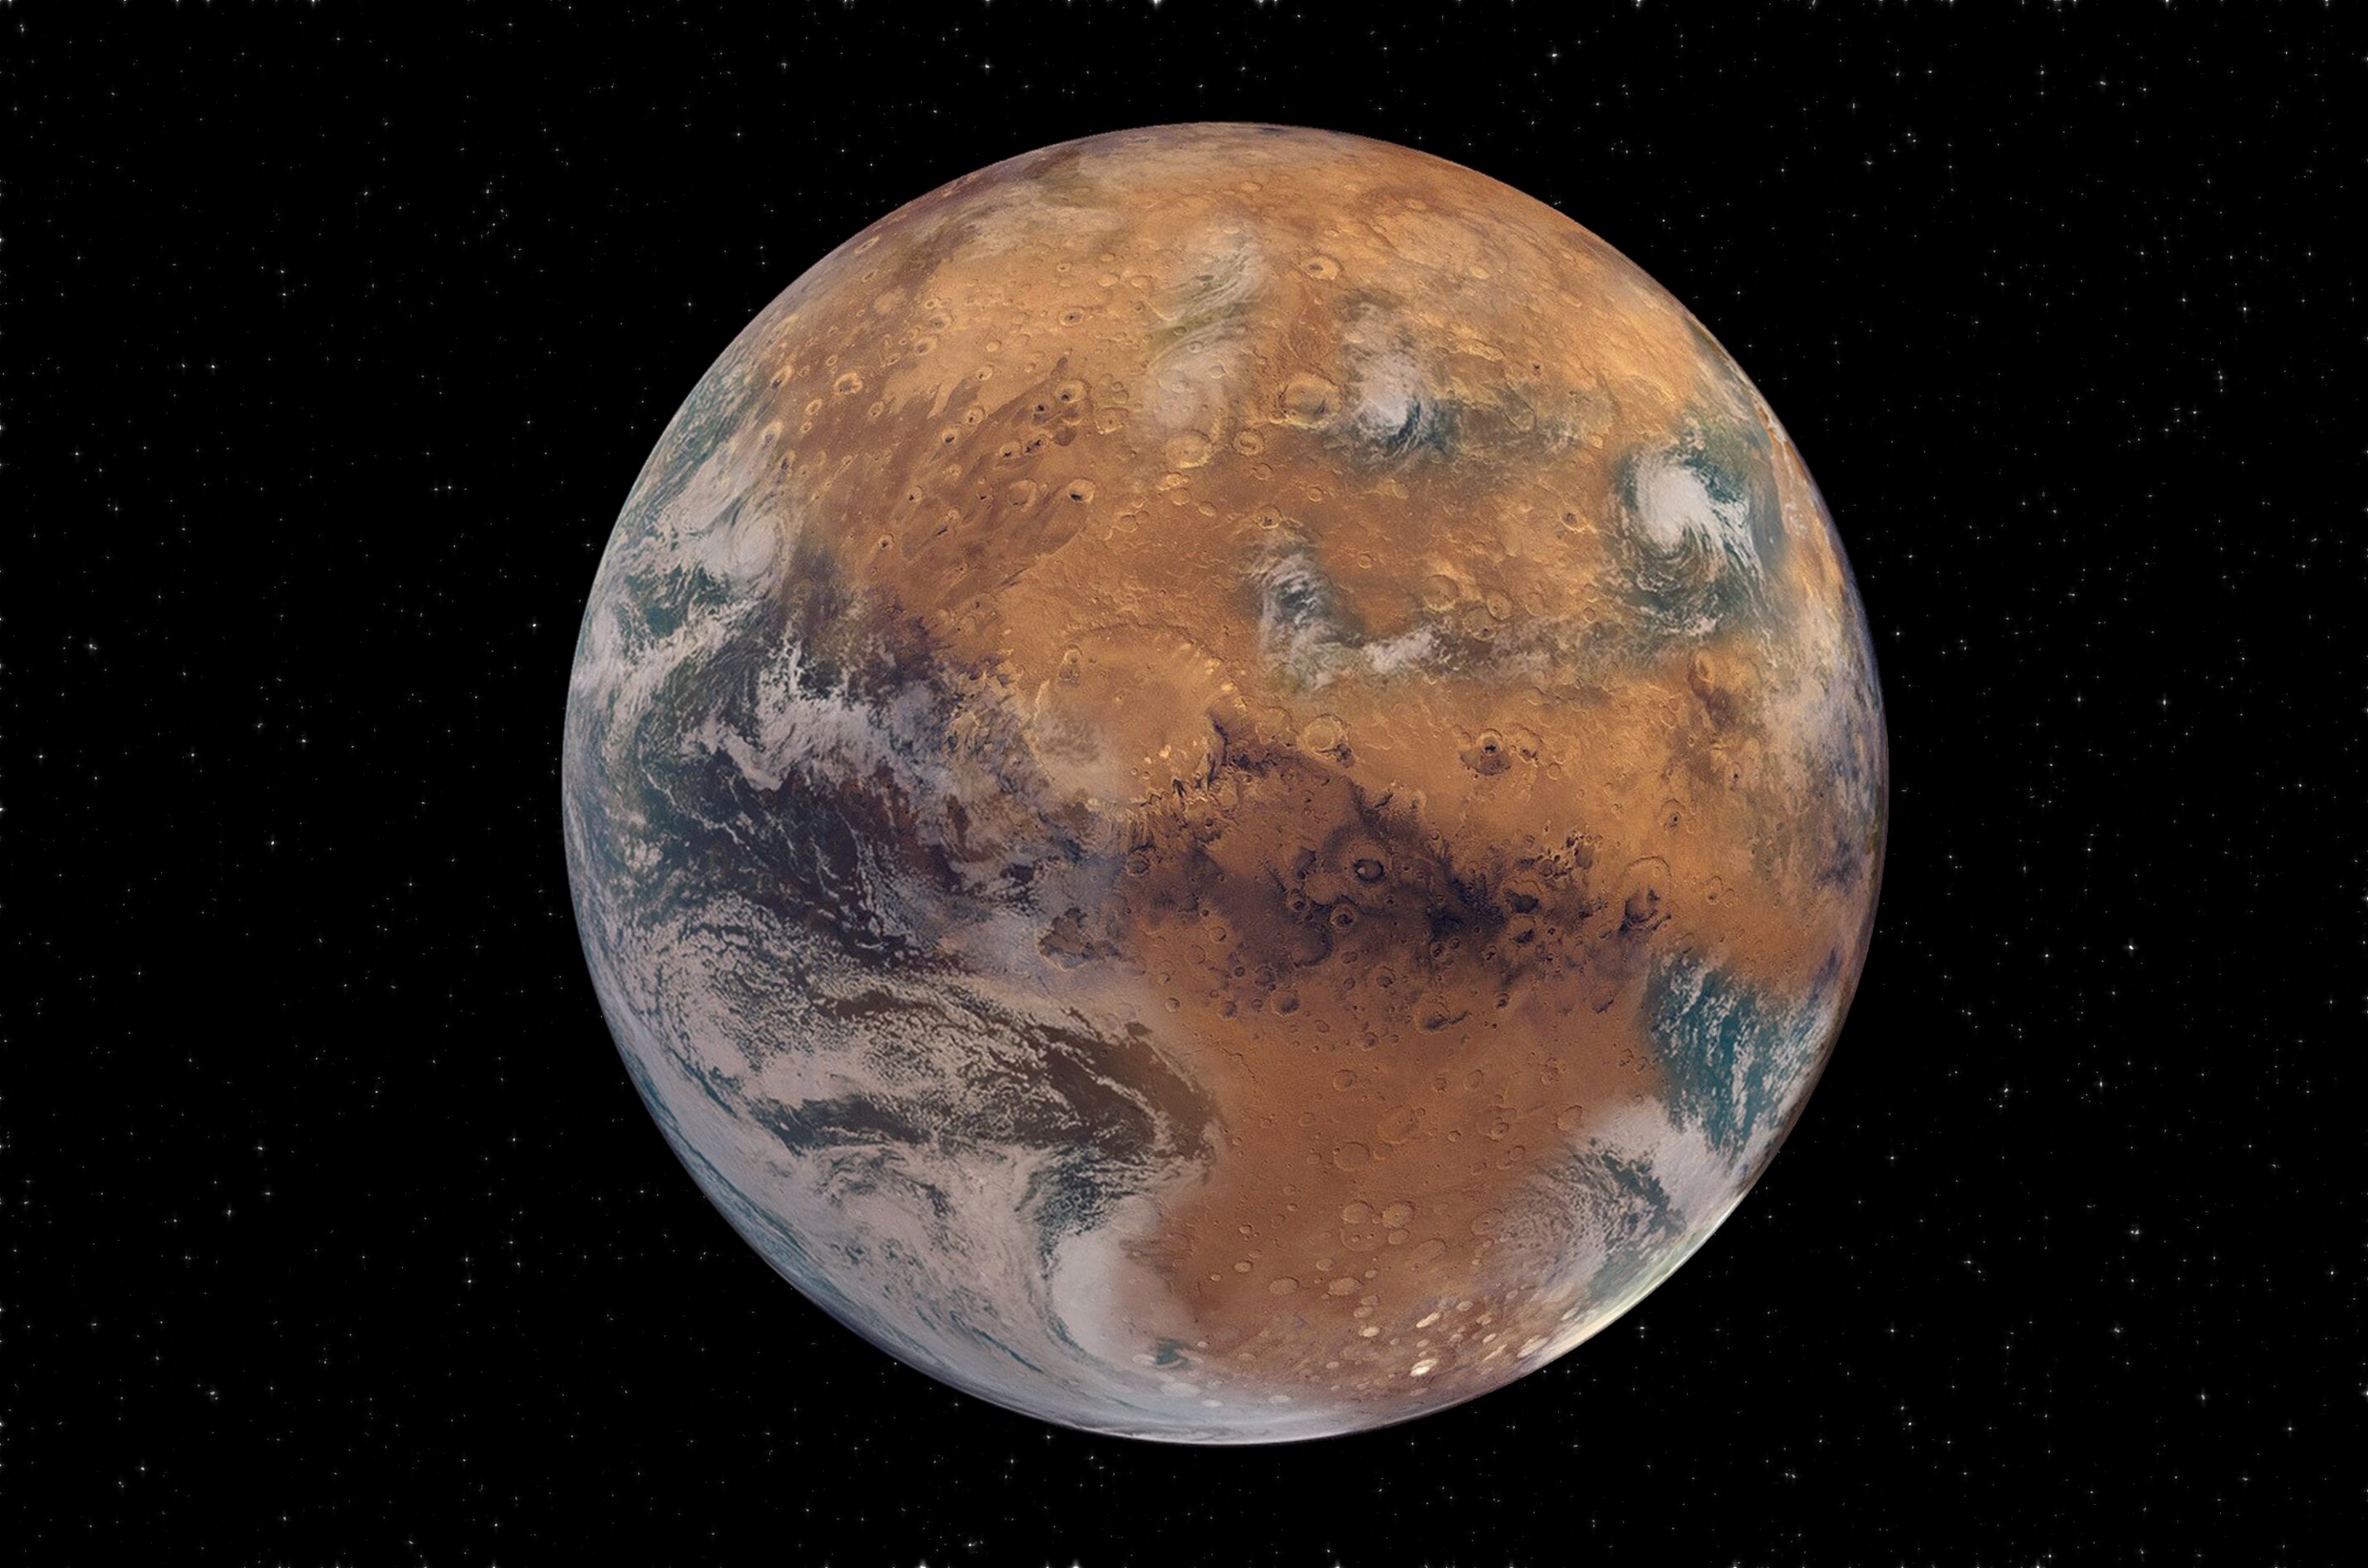 Mars habitability limited by its small size, isotope study suggests